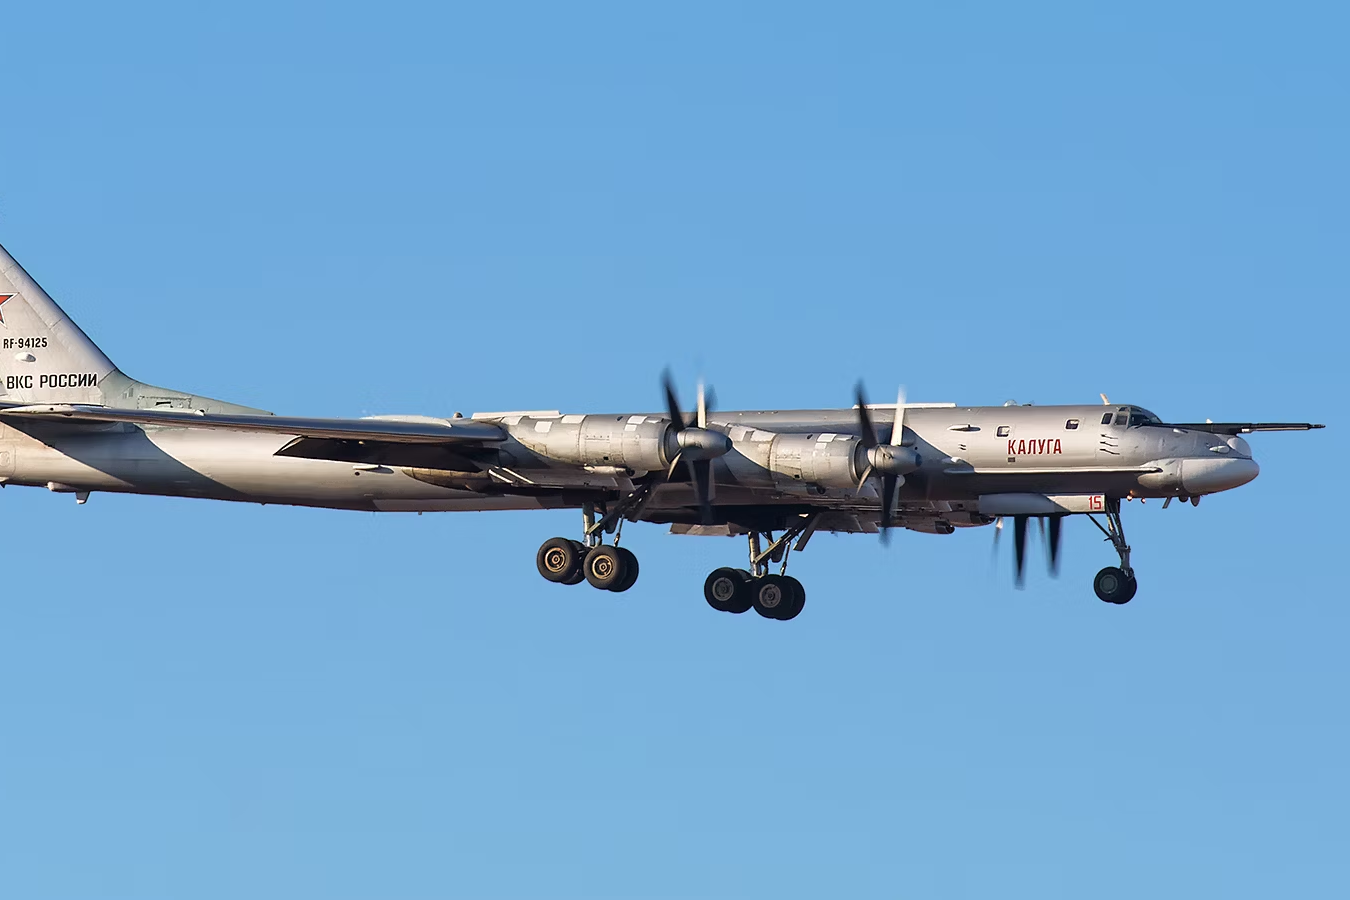 A Tupolev Tu-95 flying in the sky.